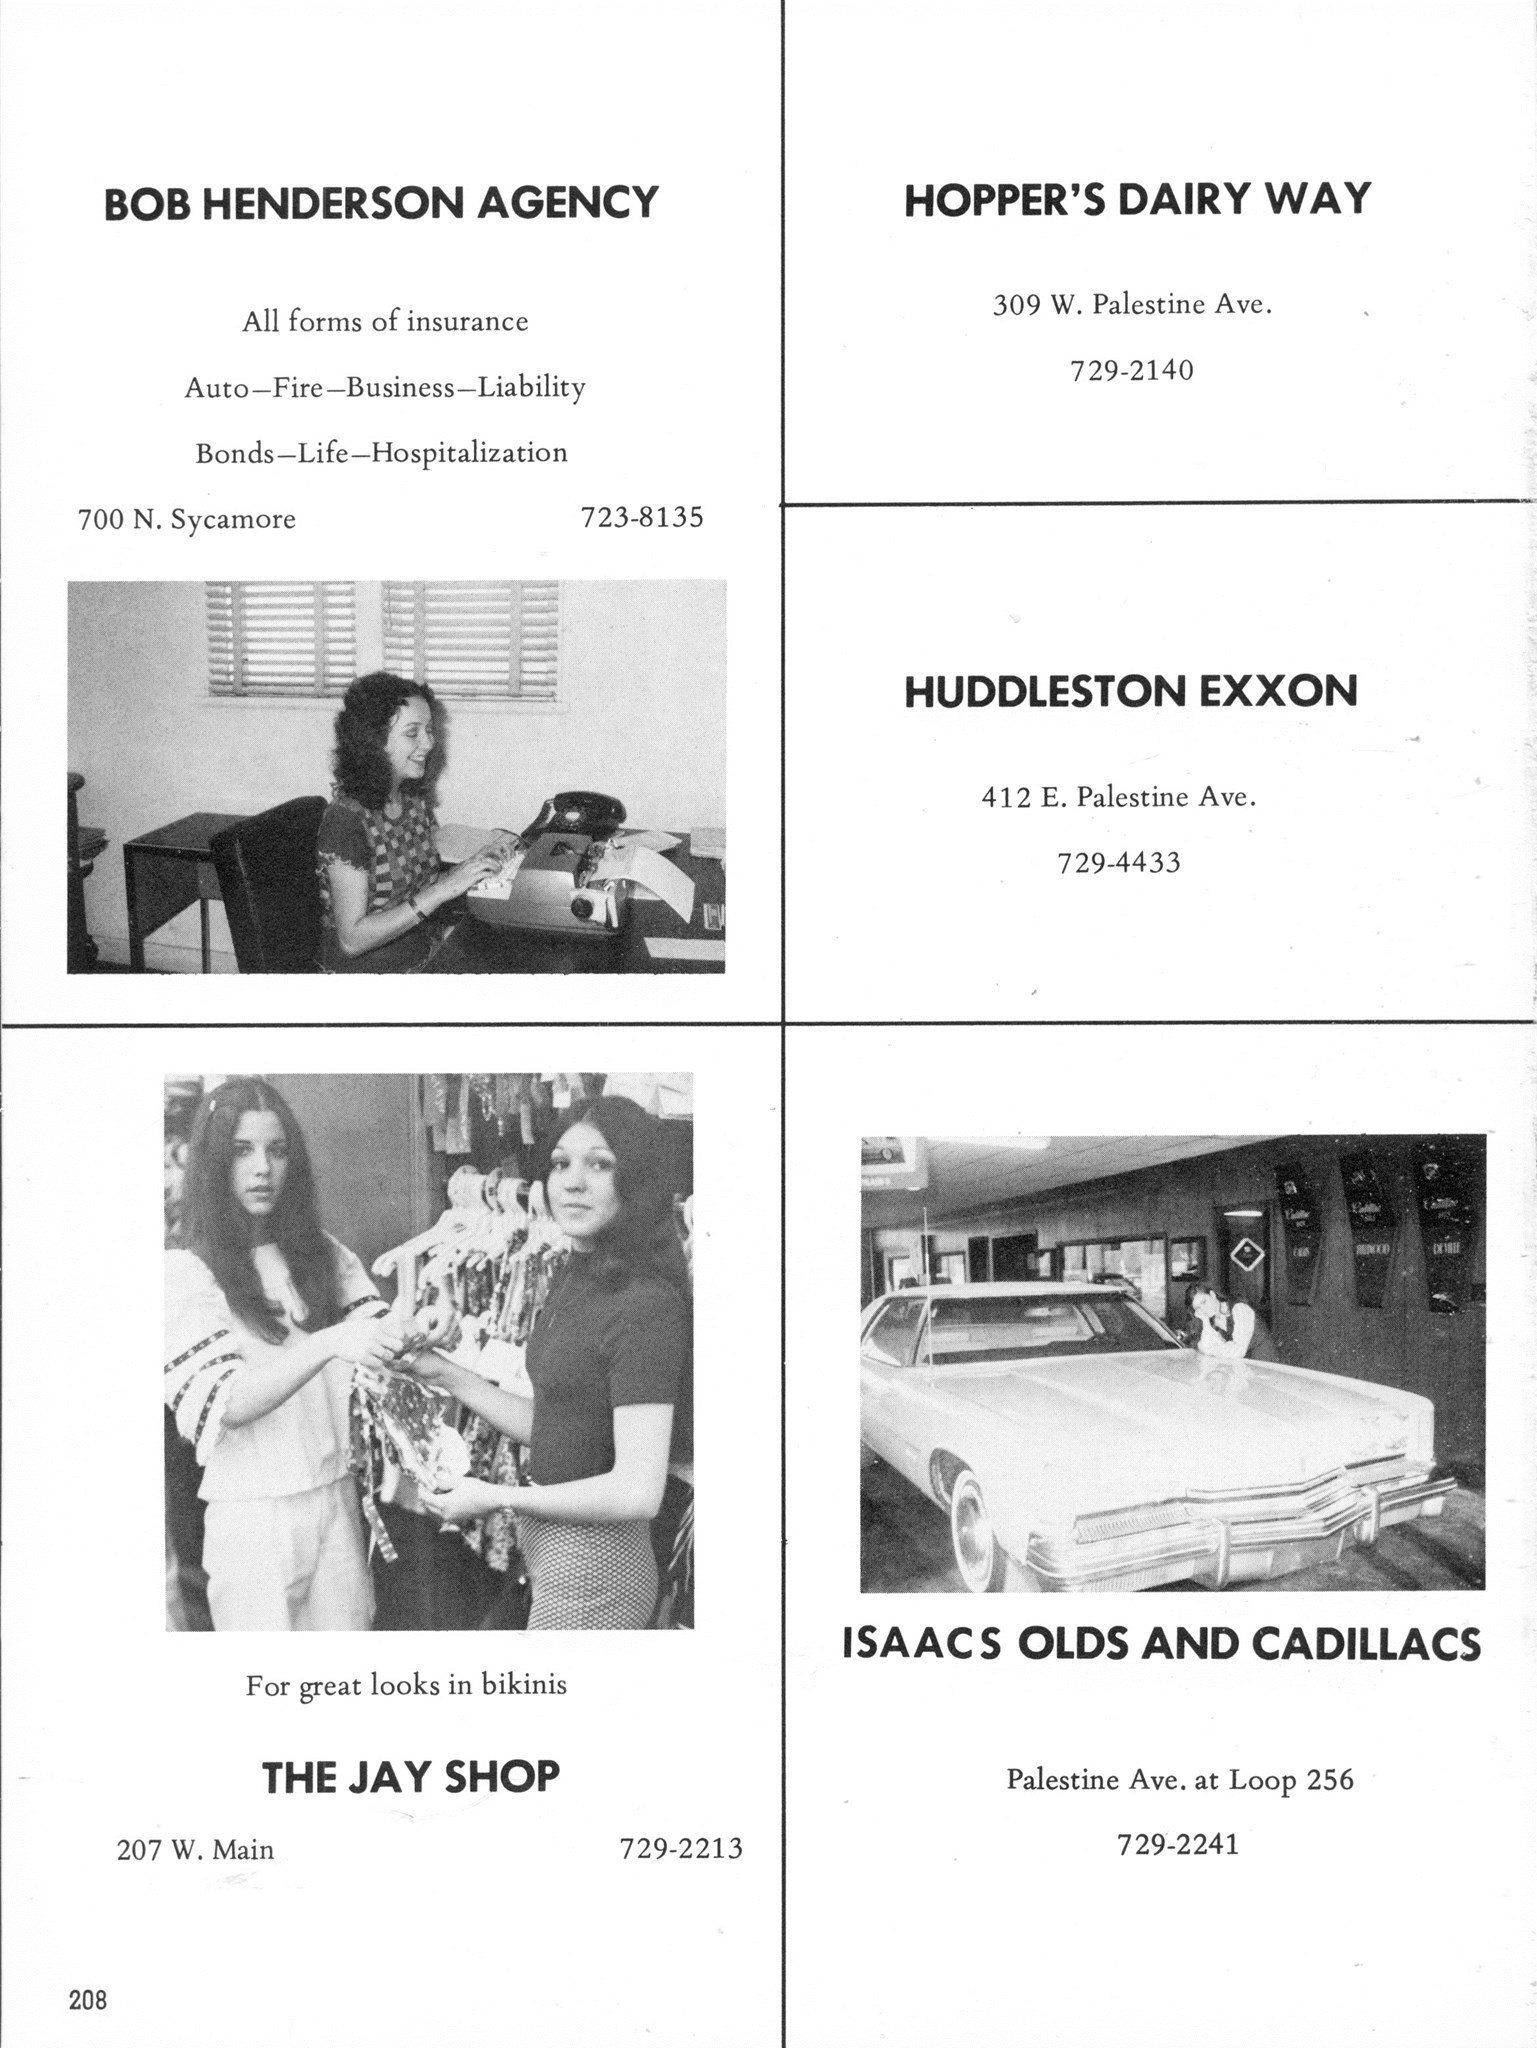 ../../../Images/Large/1973/Arclight-1973-pg0208.jpg